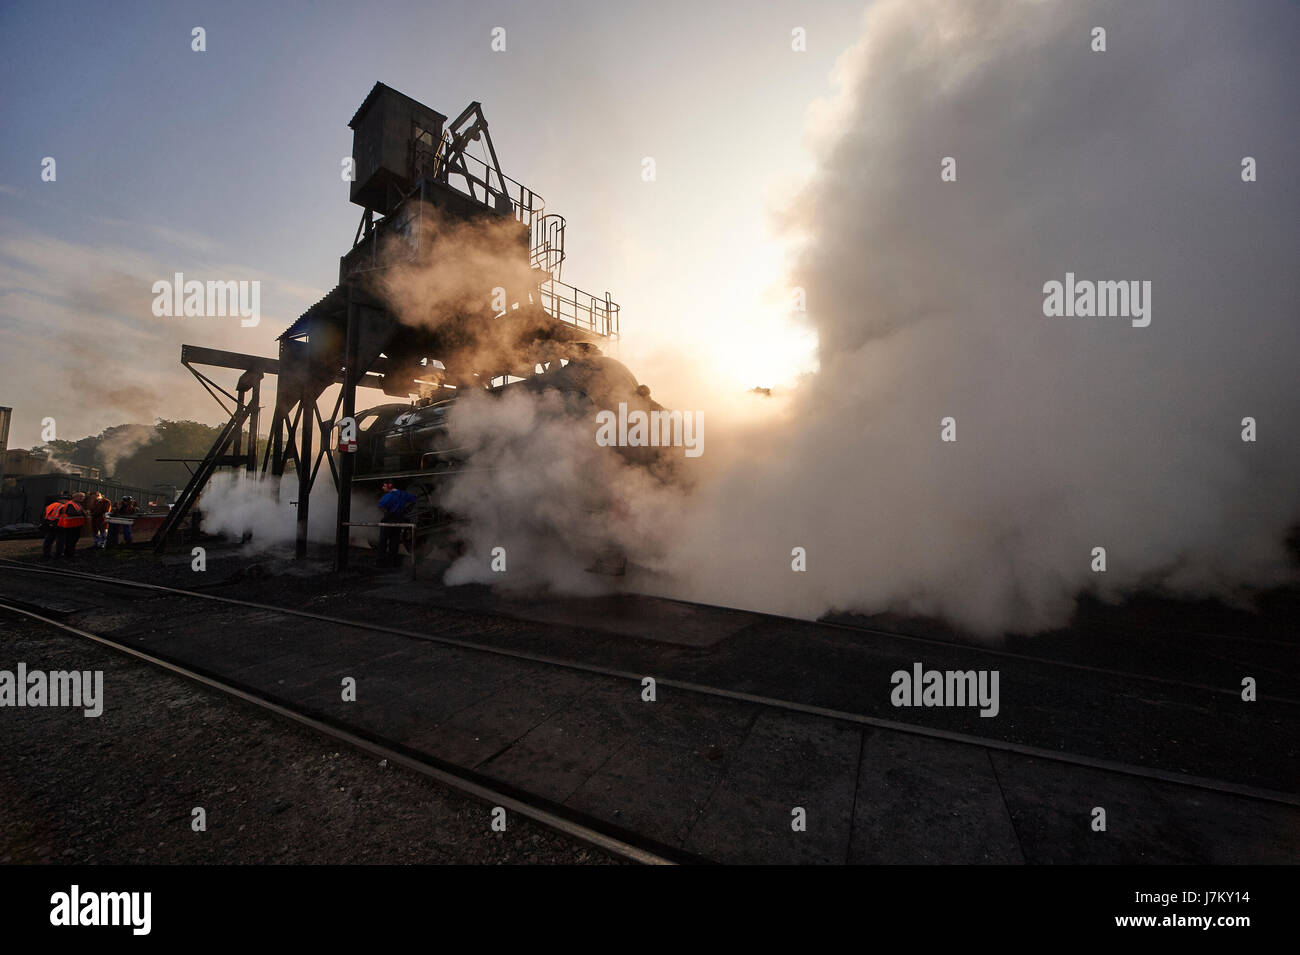 A Great Western Steam Locomotive During a Cleaning 'Blowdown' on the North Yorkshire Moors Railway NYMR Stock Photo